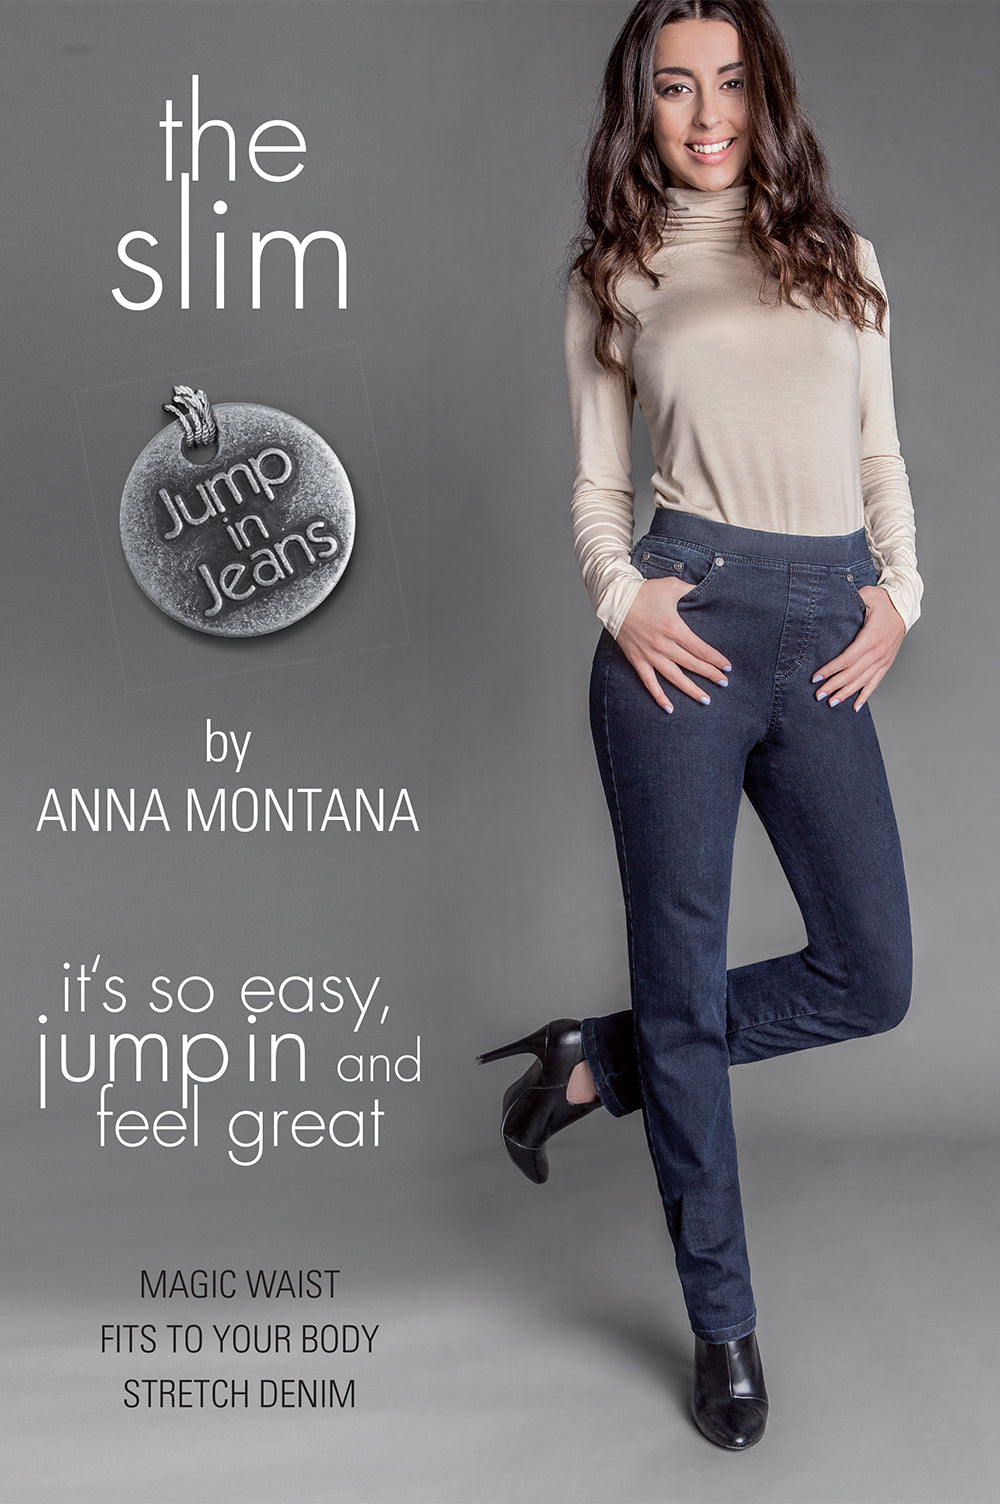 Trousers | Anna Montana | Anna Montana Jump in Jeans Summer Stone Light Denim - 1001 | Anna Montana is among the leading specialists of trousers and is characterised by the perfect fit stretch jean, as shown on ITVs Lorraine Kelly. Product Code: 1001.